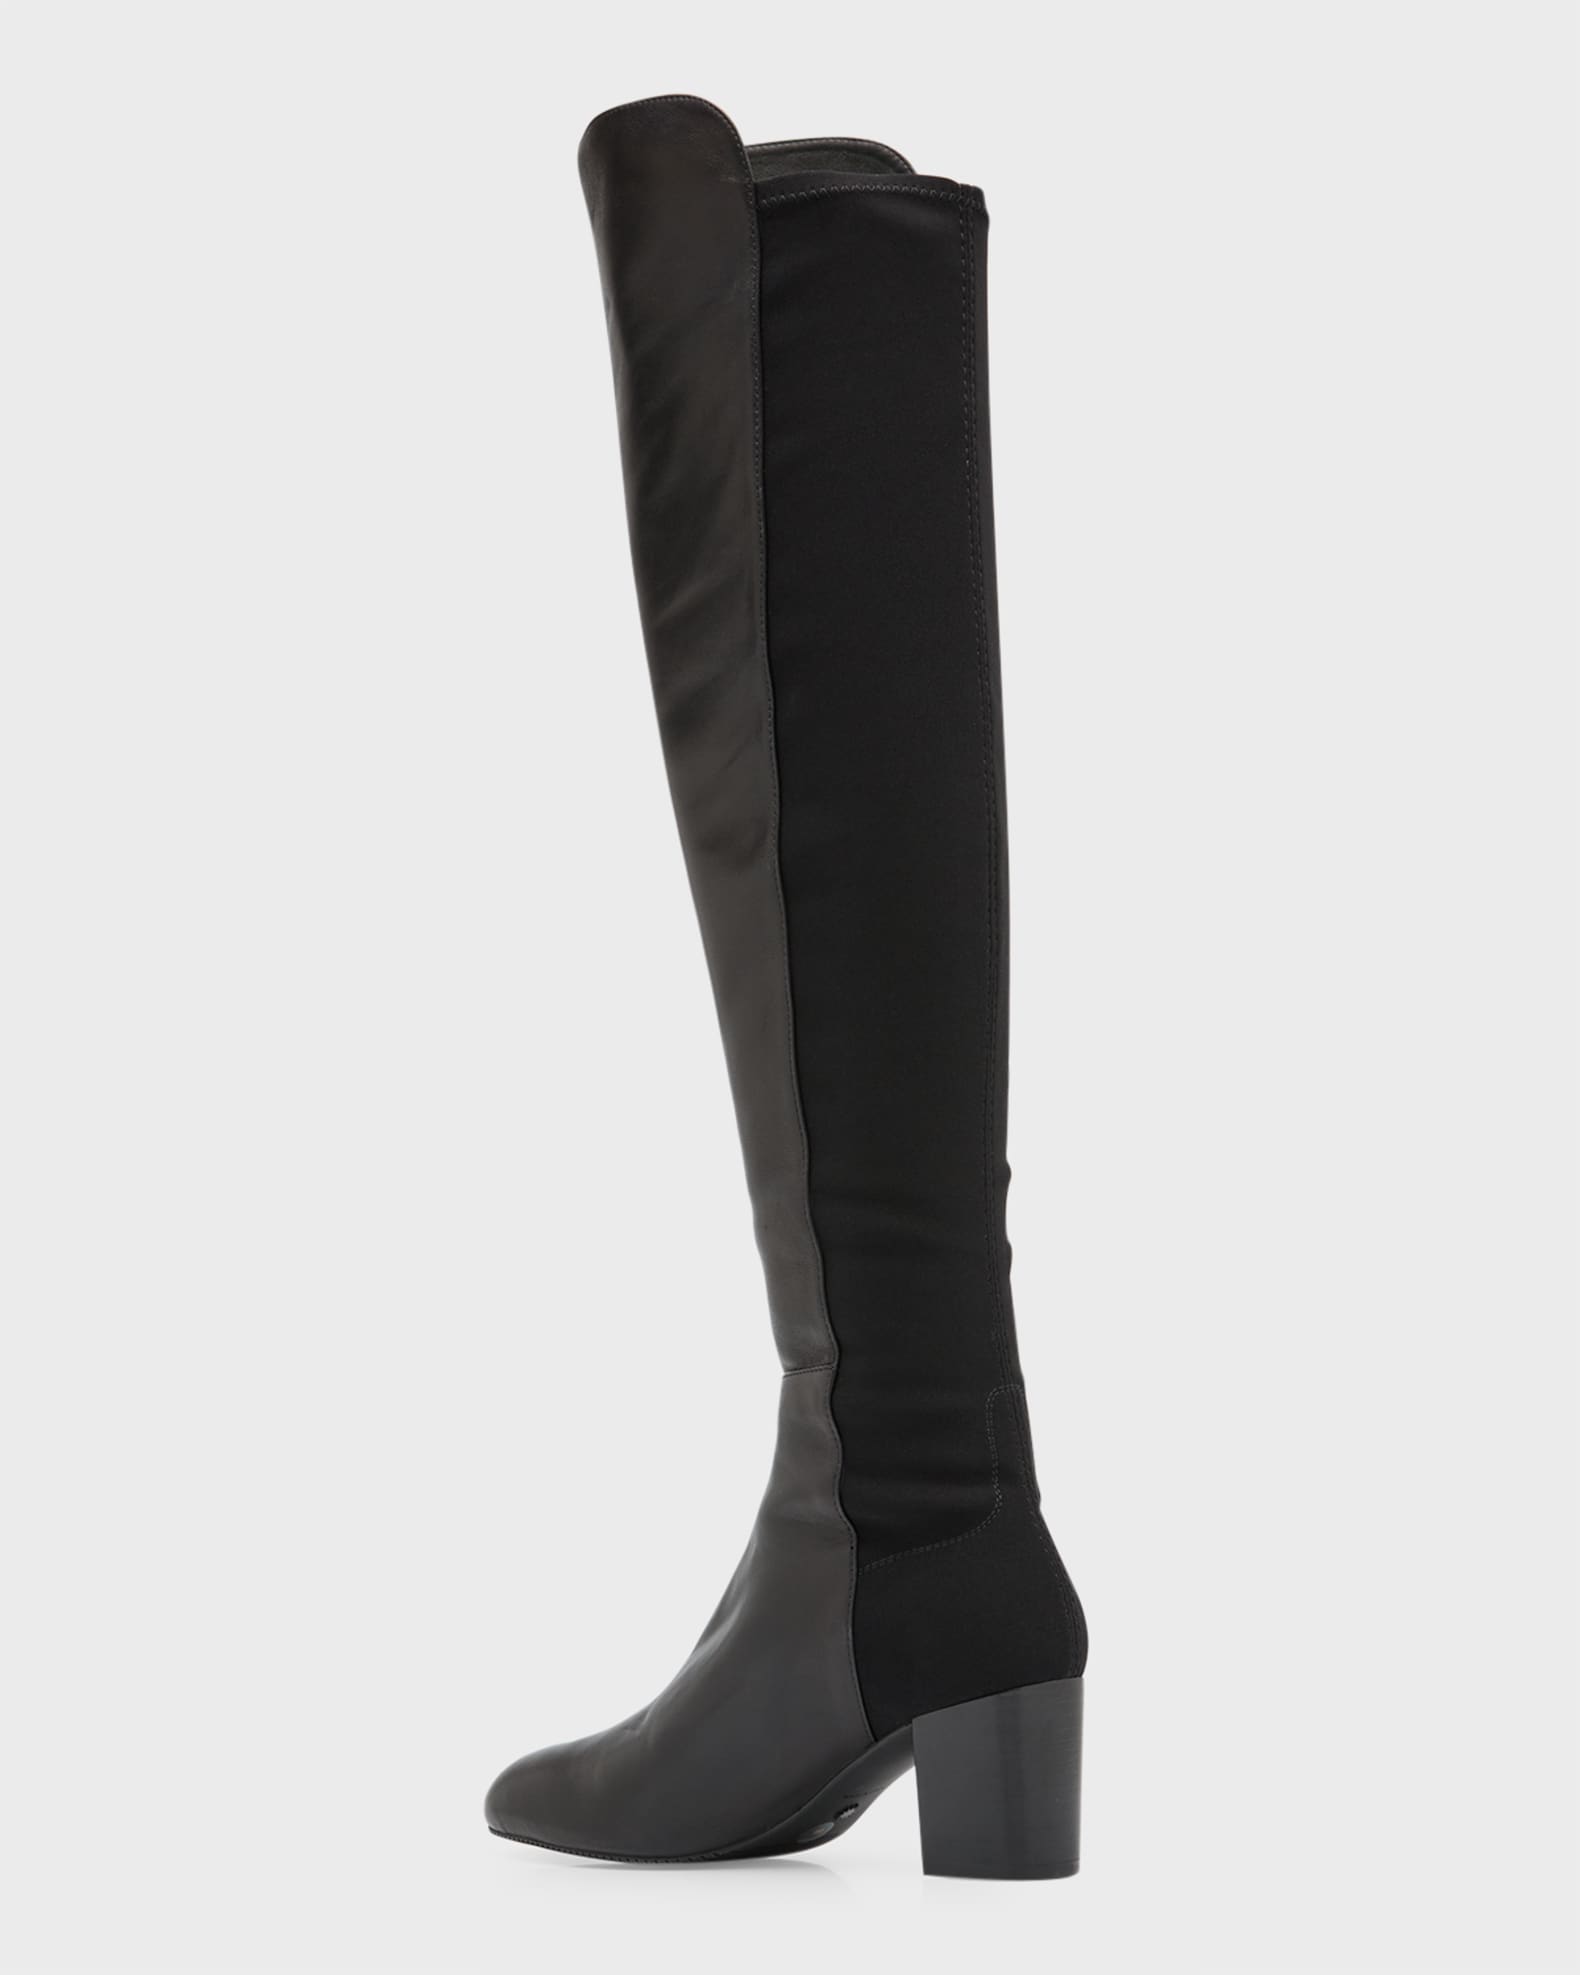 Stuart Weitzman Stretch Leather Over-The-Knee Boots | Neiman Marcus